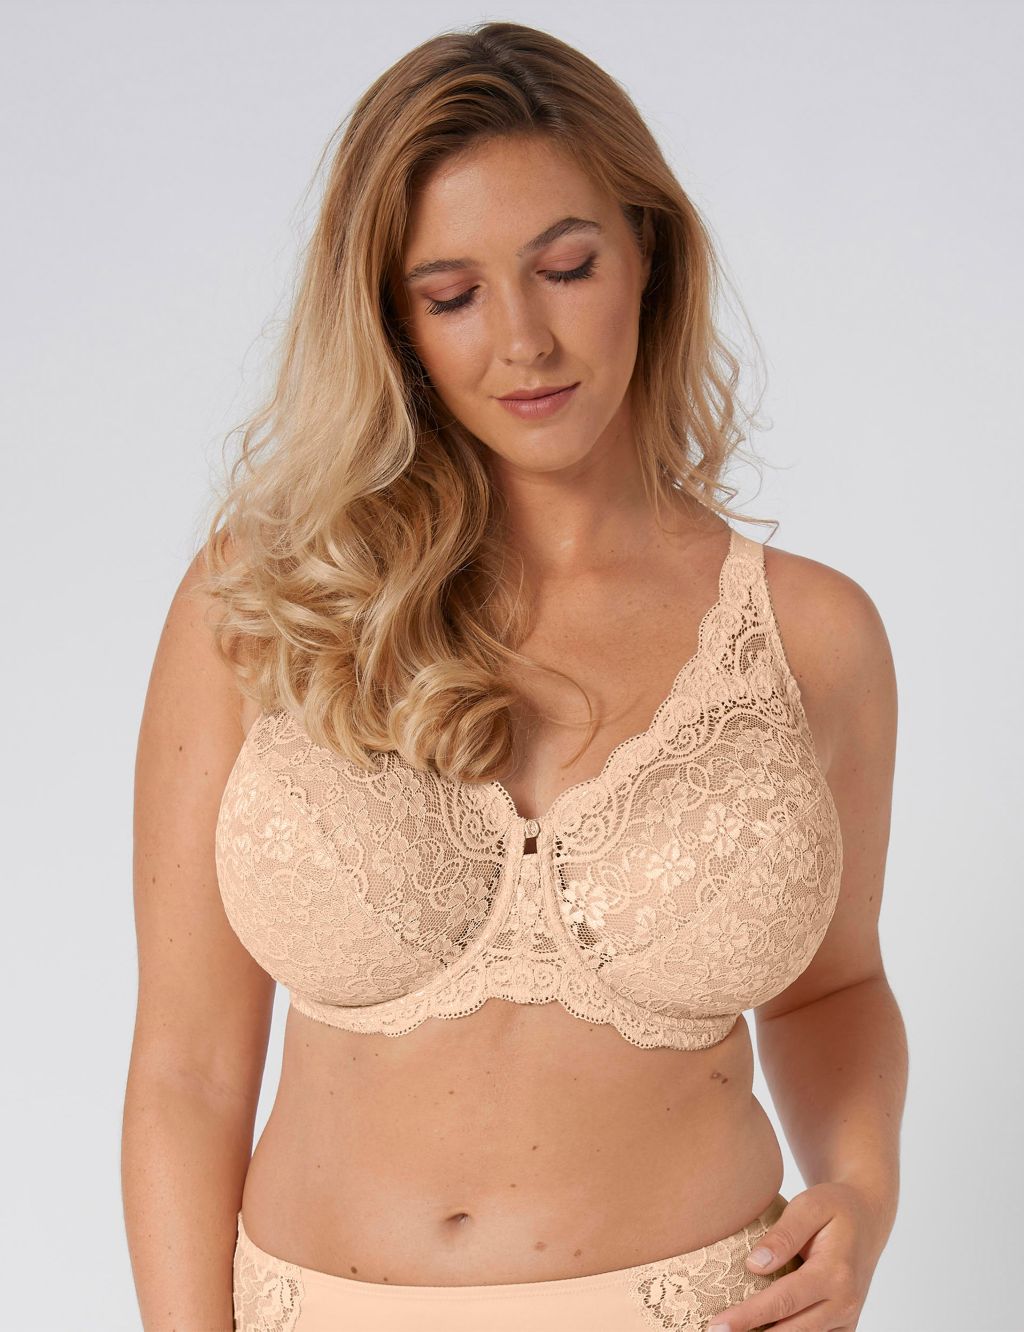 Amourette 300 Lace Underwired Full Cup Bra B-G image 1